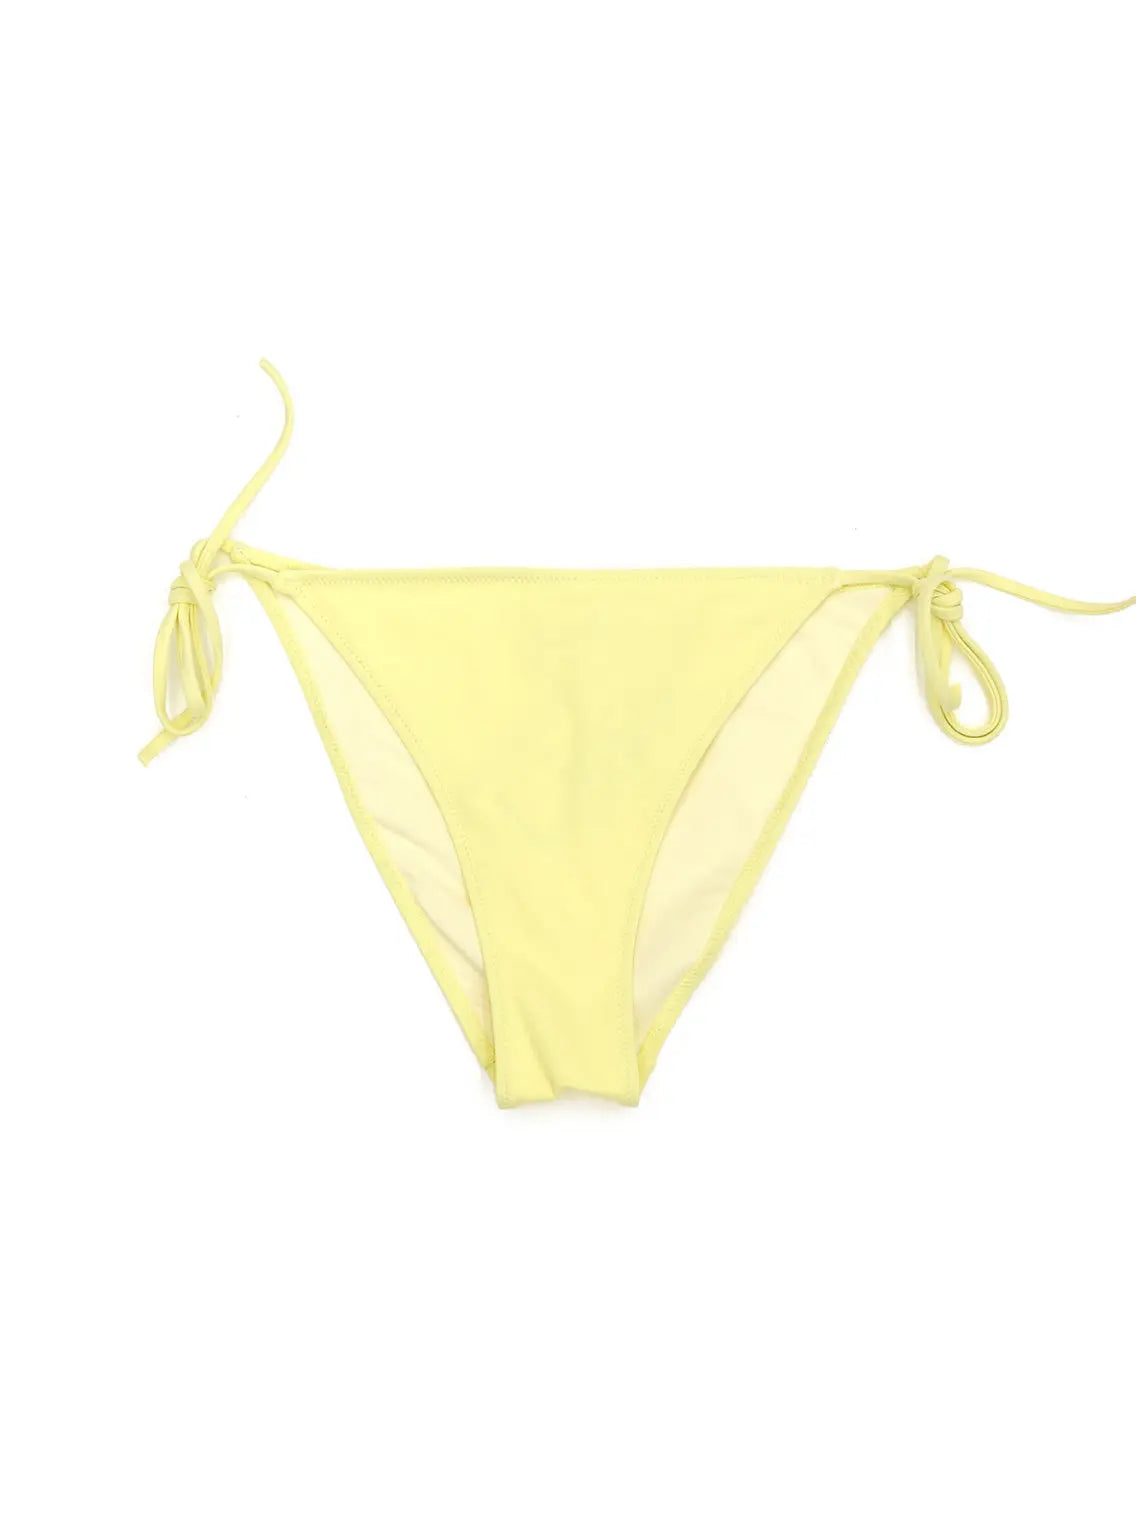 A pair of Venti Pollen Bikini Bottoms by Lido with side tie strings, laid flat on a white background. The material appears smooth and stretchy, designed for swimwear. Available at Bassalstore in Barcelona.